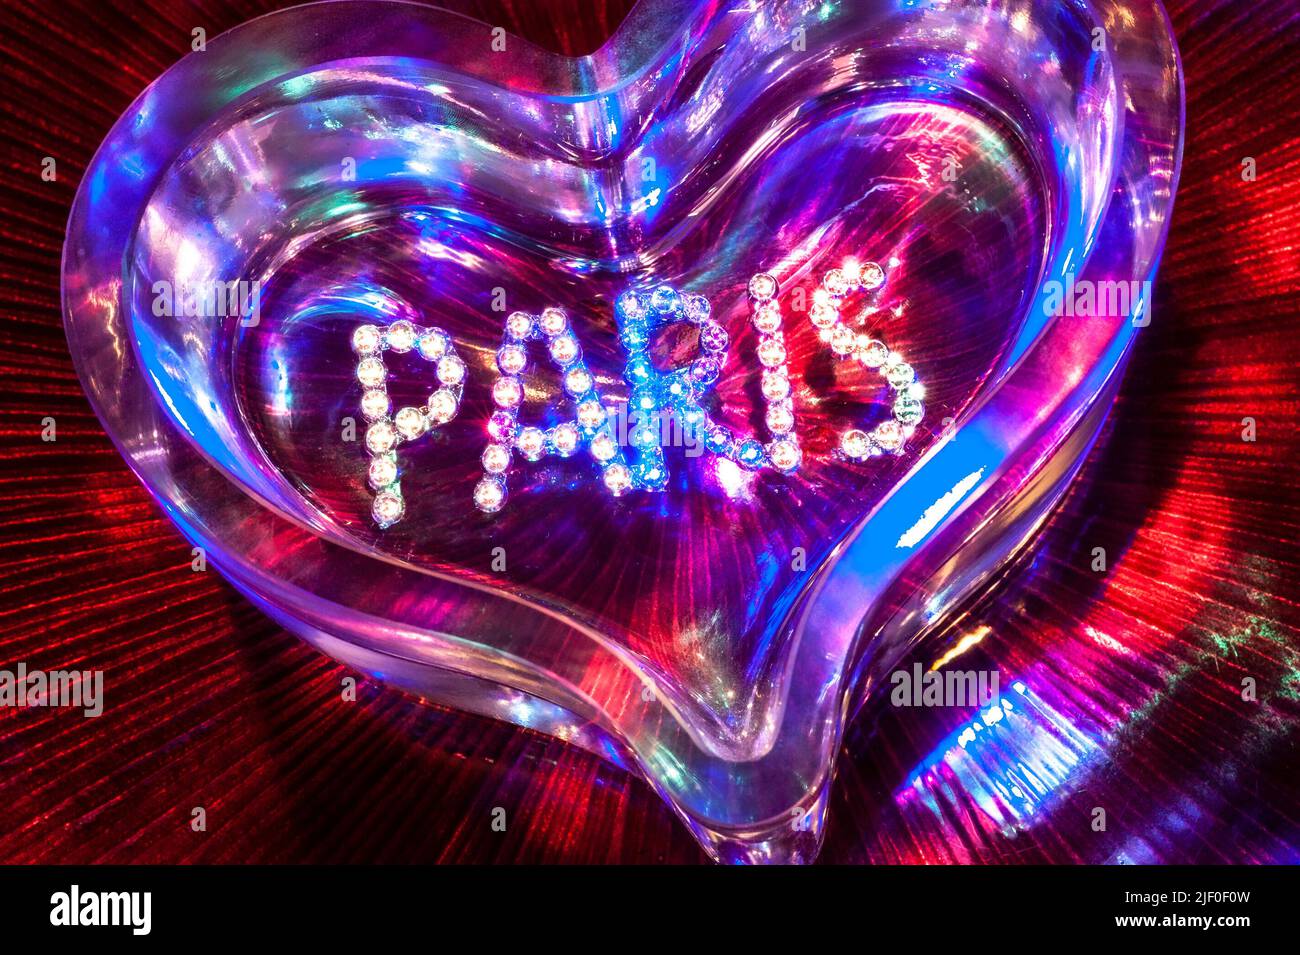 PARIS NIGHTCLUB PIGALLE SHOWTIME CABARET CLUB diamonds crystal glass heart with mixed colour lighting in fun clubbing party theatre disco show concept Stock Photo